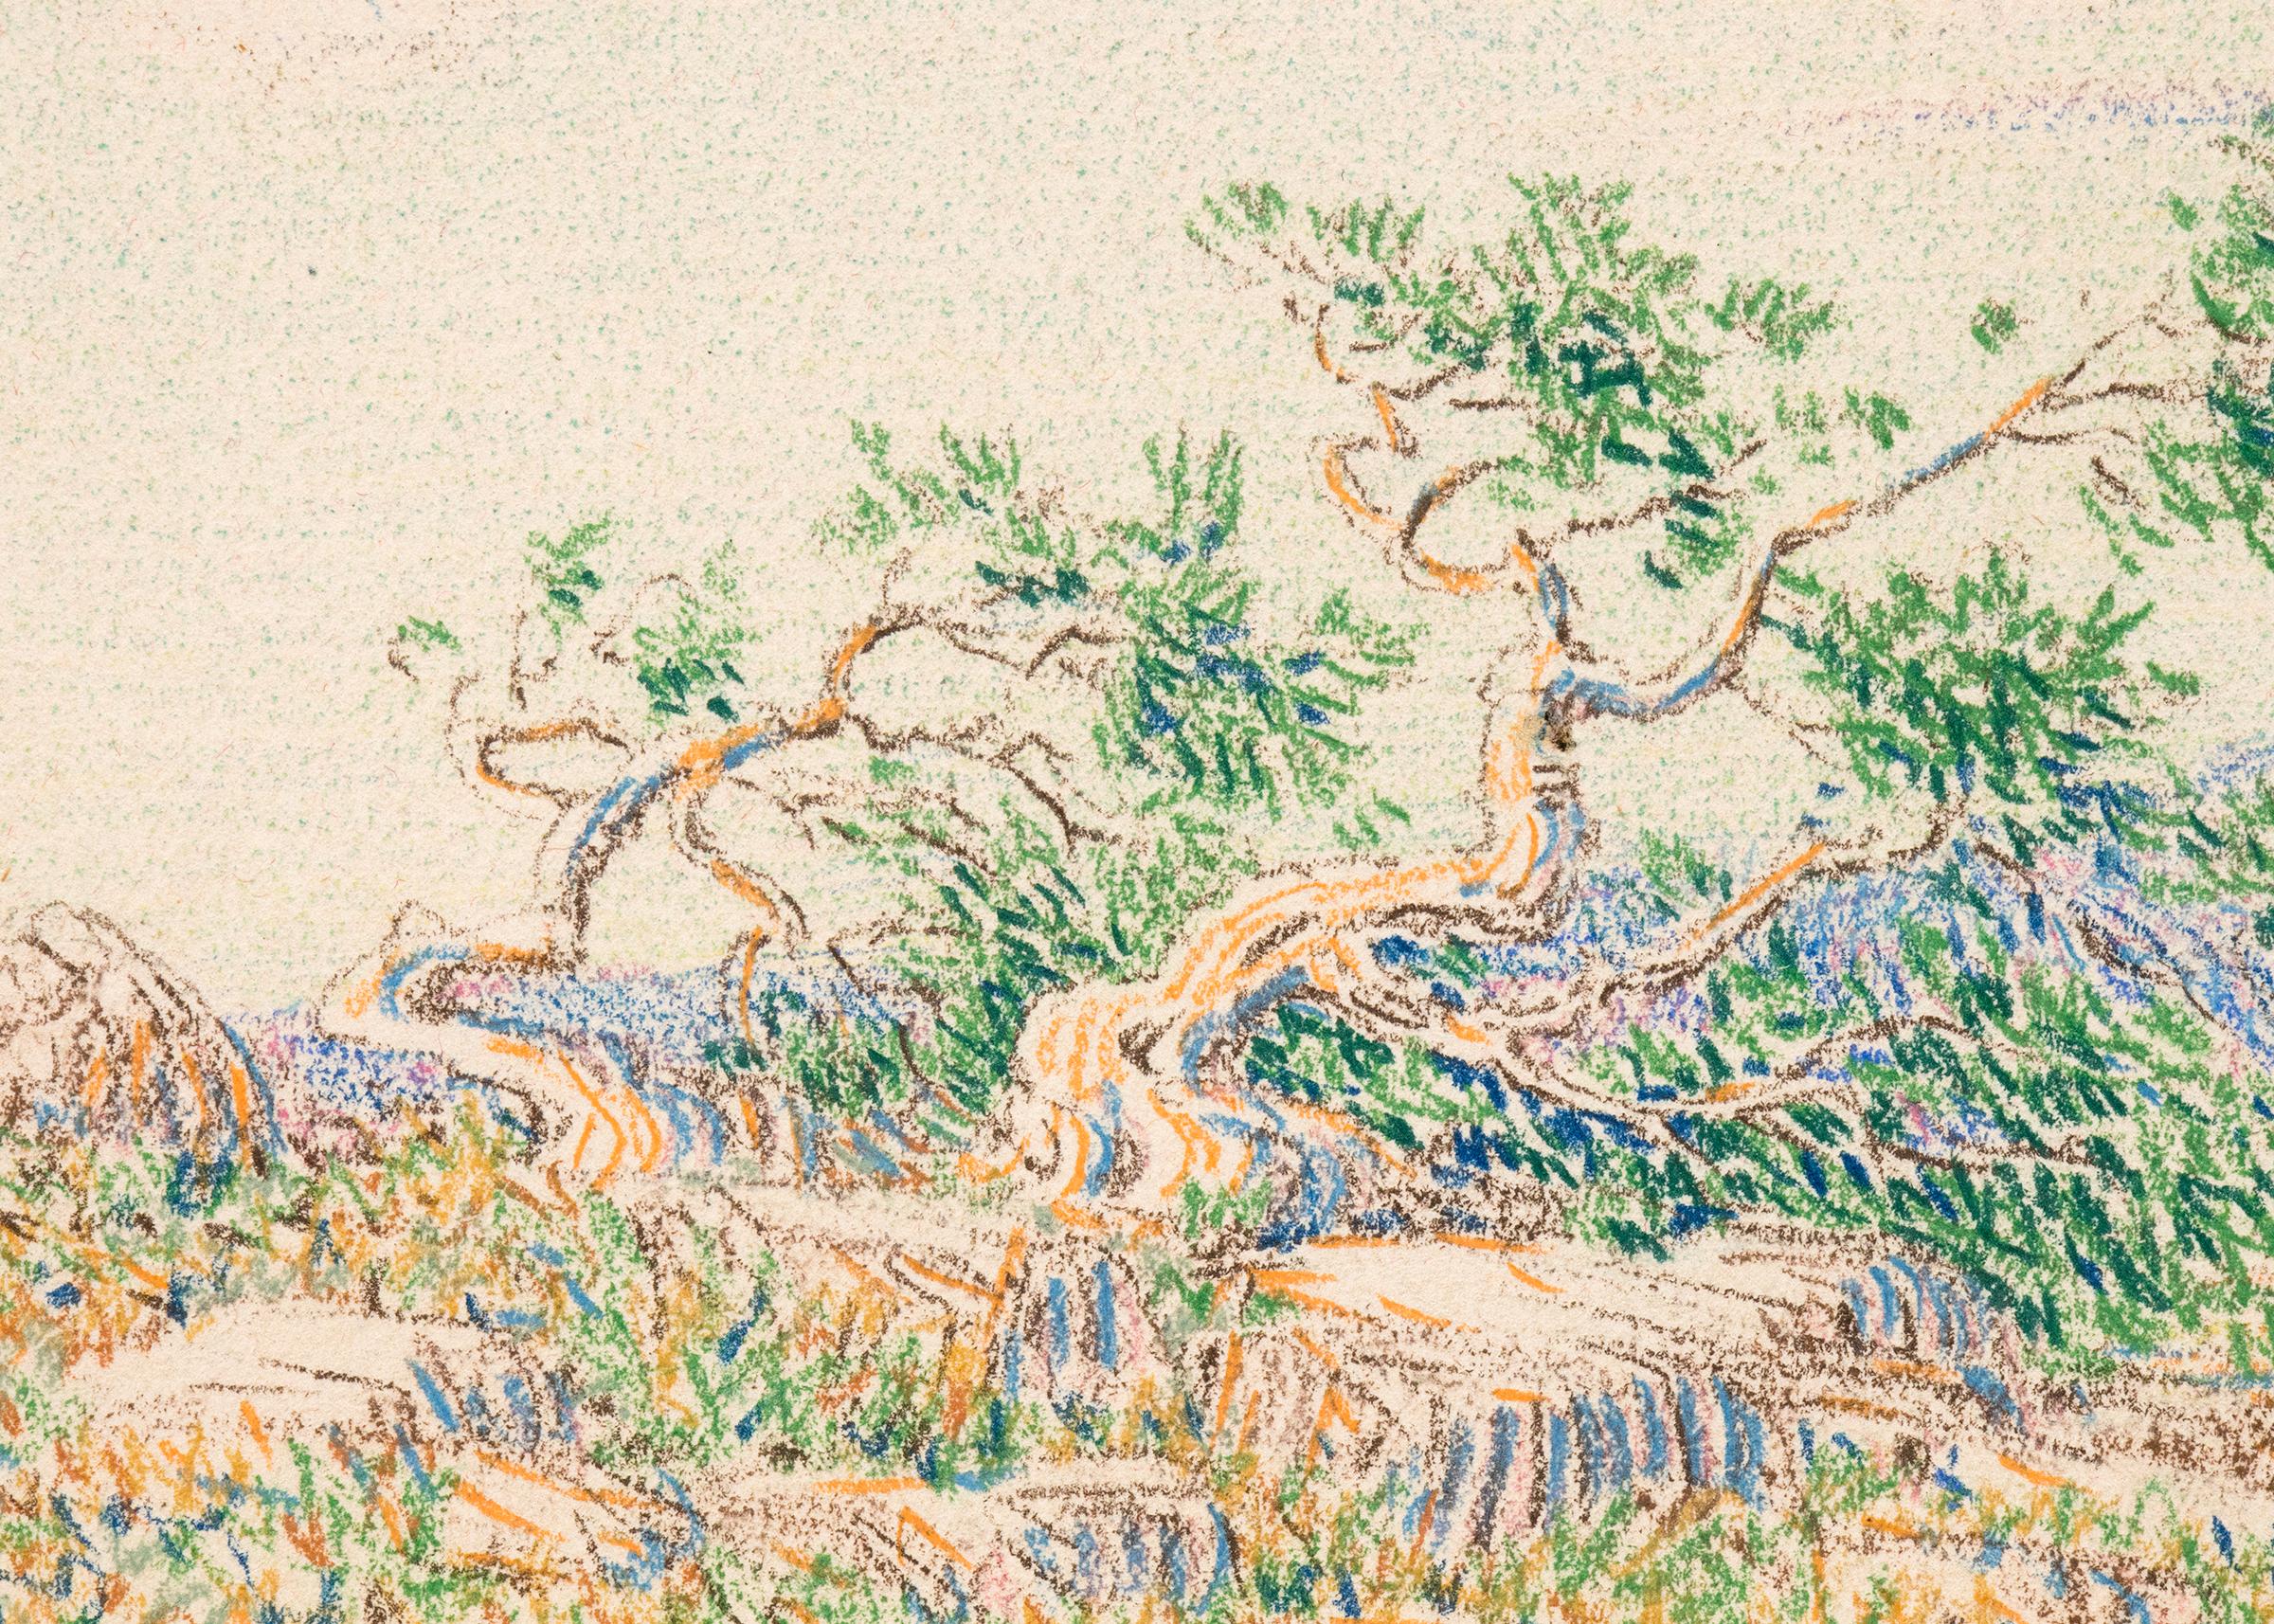 Morning Near Arizona, (Desert Landscape) is an original color pencil drawing from 1888 by George Elbert Burr (1859-1939). Portrays a spring/summer landscape with a tree and fauna, clouds, a mountain peak in the distance. Presented in a custom frame